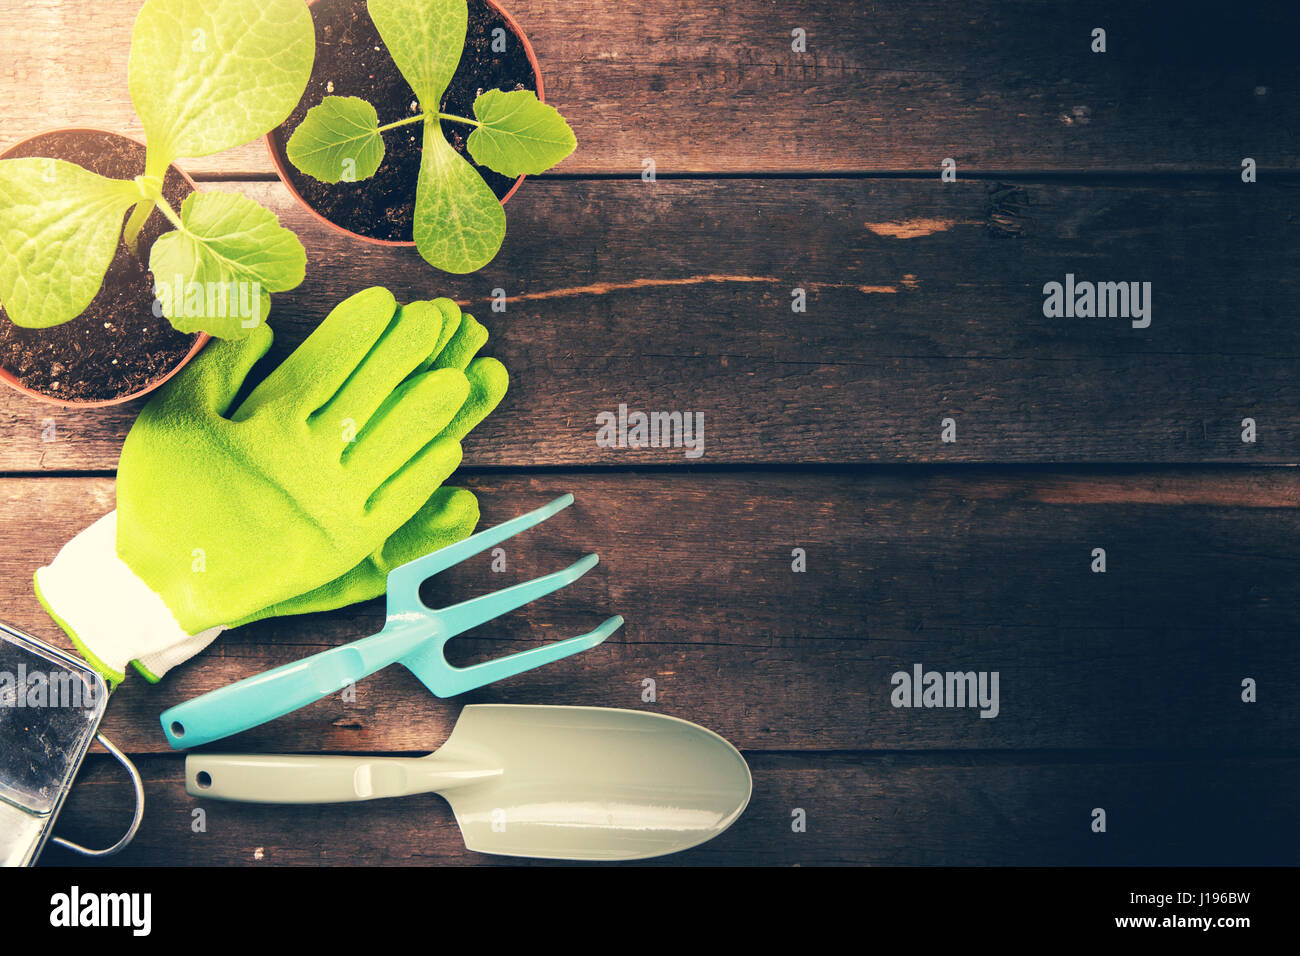 gardening tools and plants on old wooden background with copy space Stock Photo